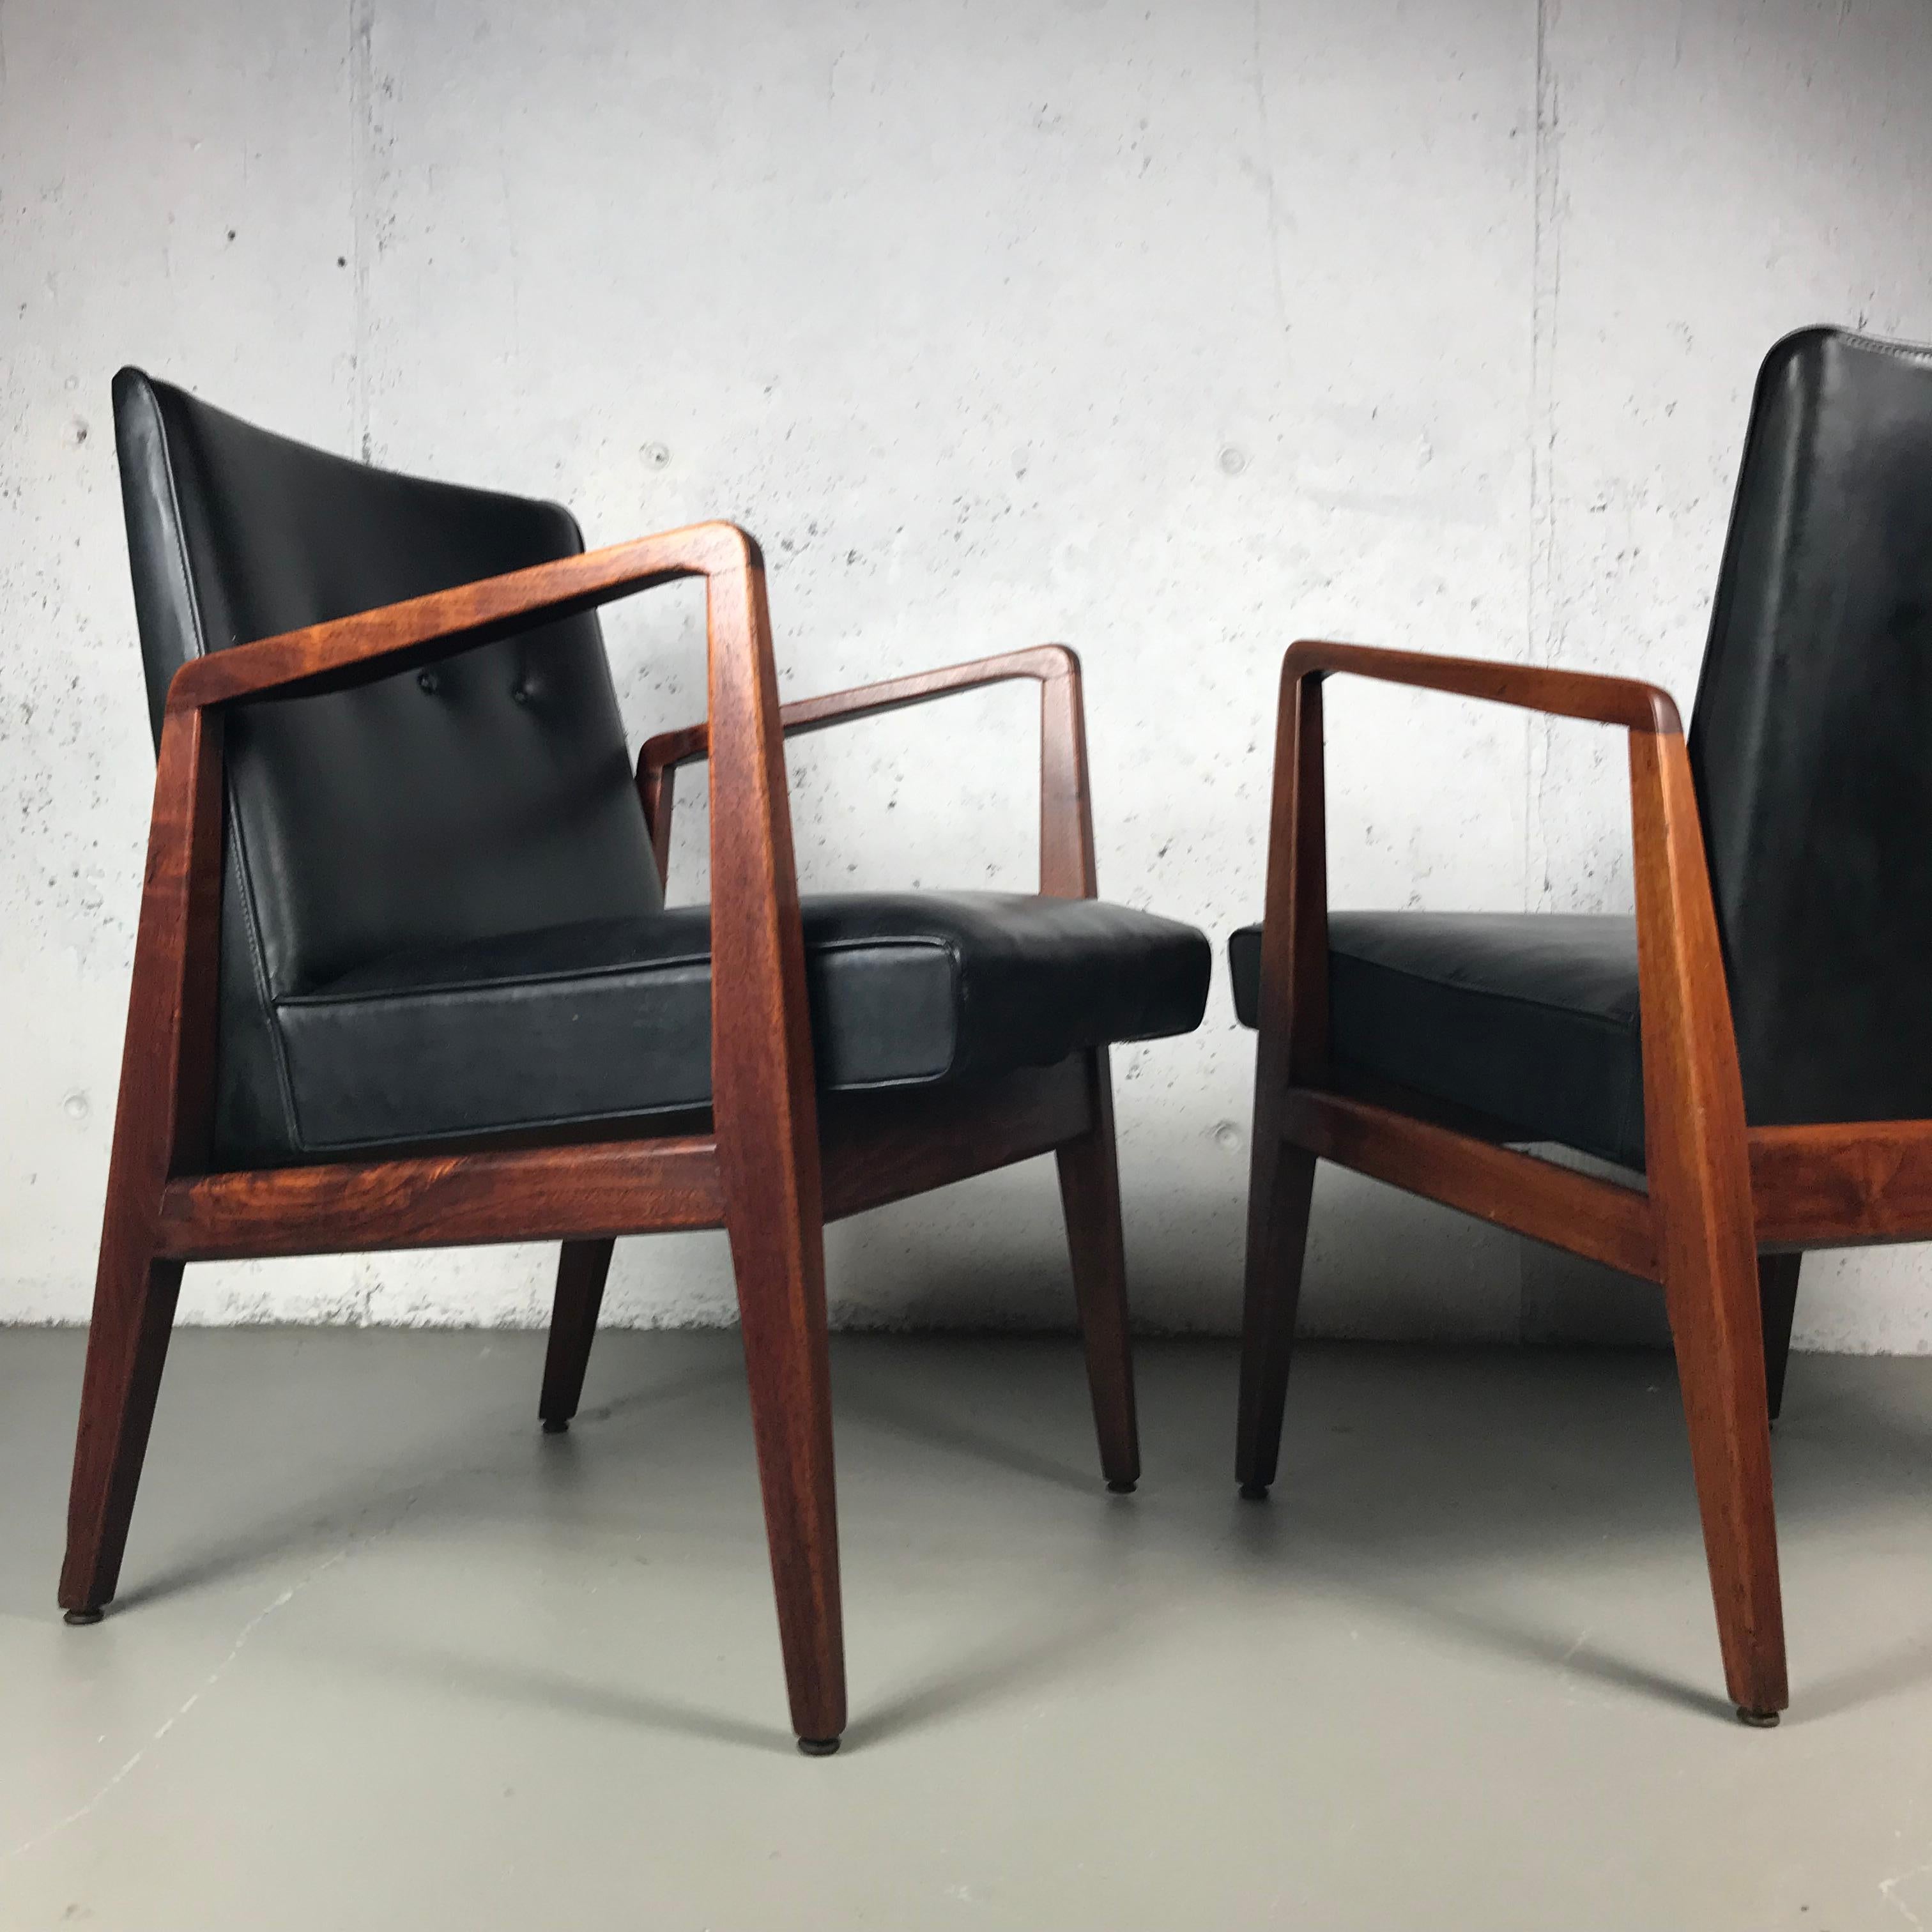 Mid-Century Modern Pair of Occasional Lounge Chairs by Jens Risom Walnut and Black Vinyl Original